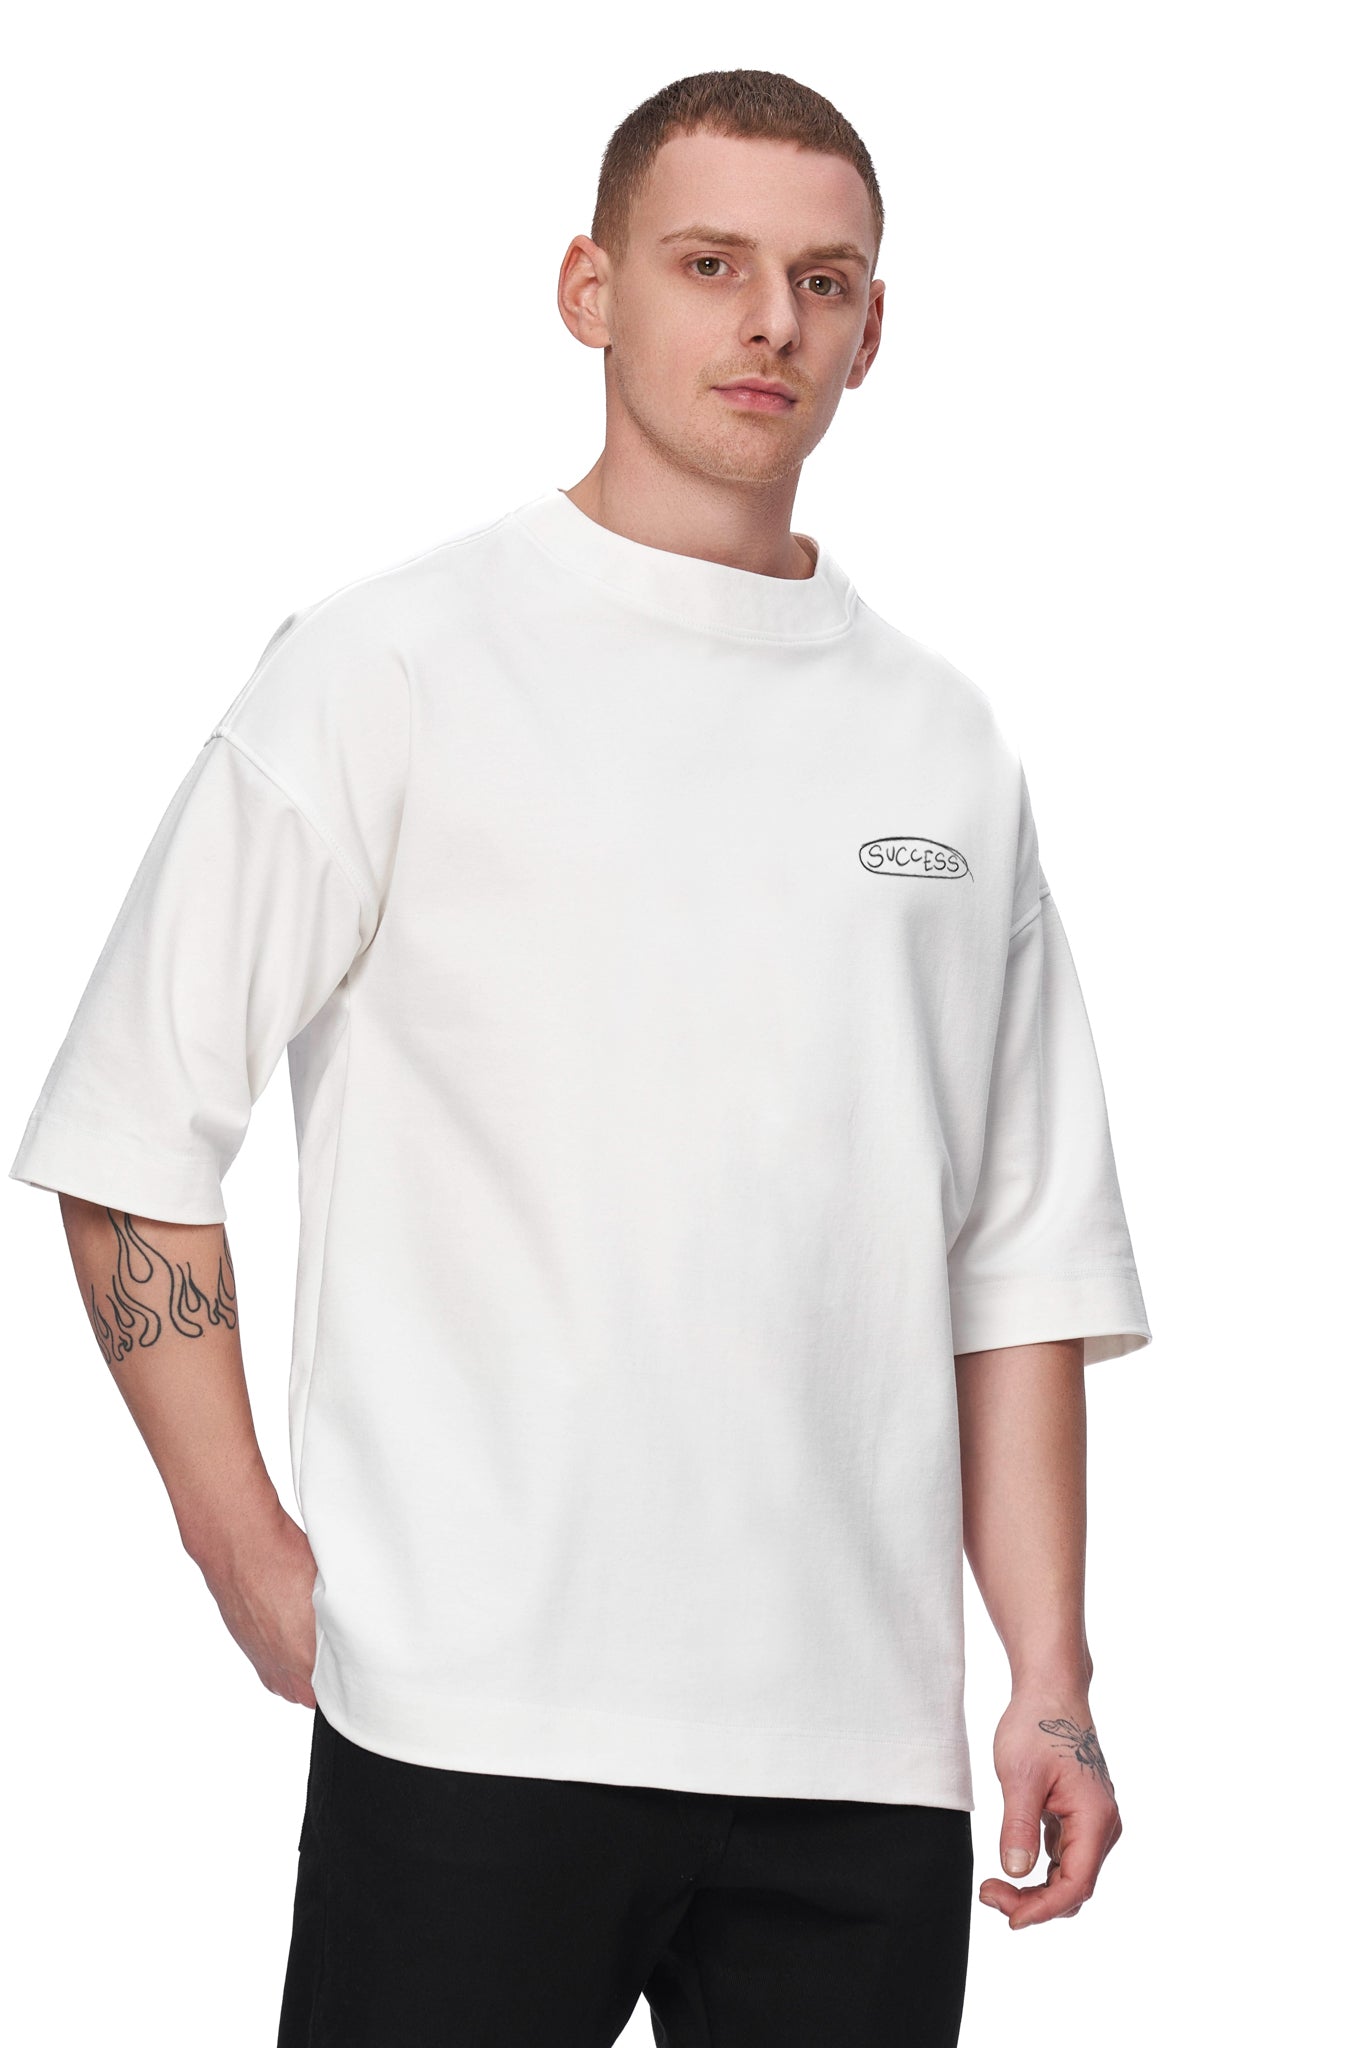 SUCCESS embroidered WHITE T-shirt